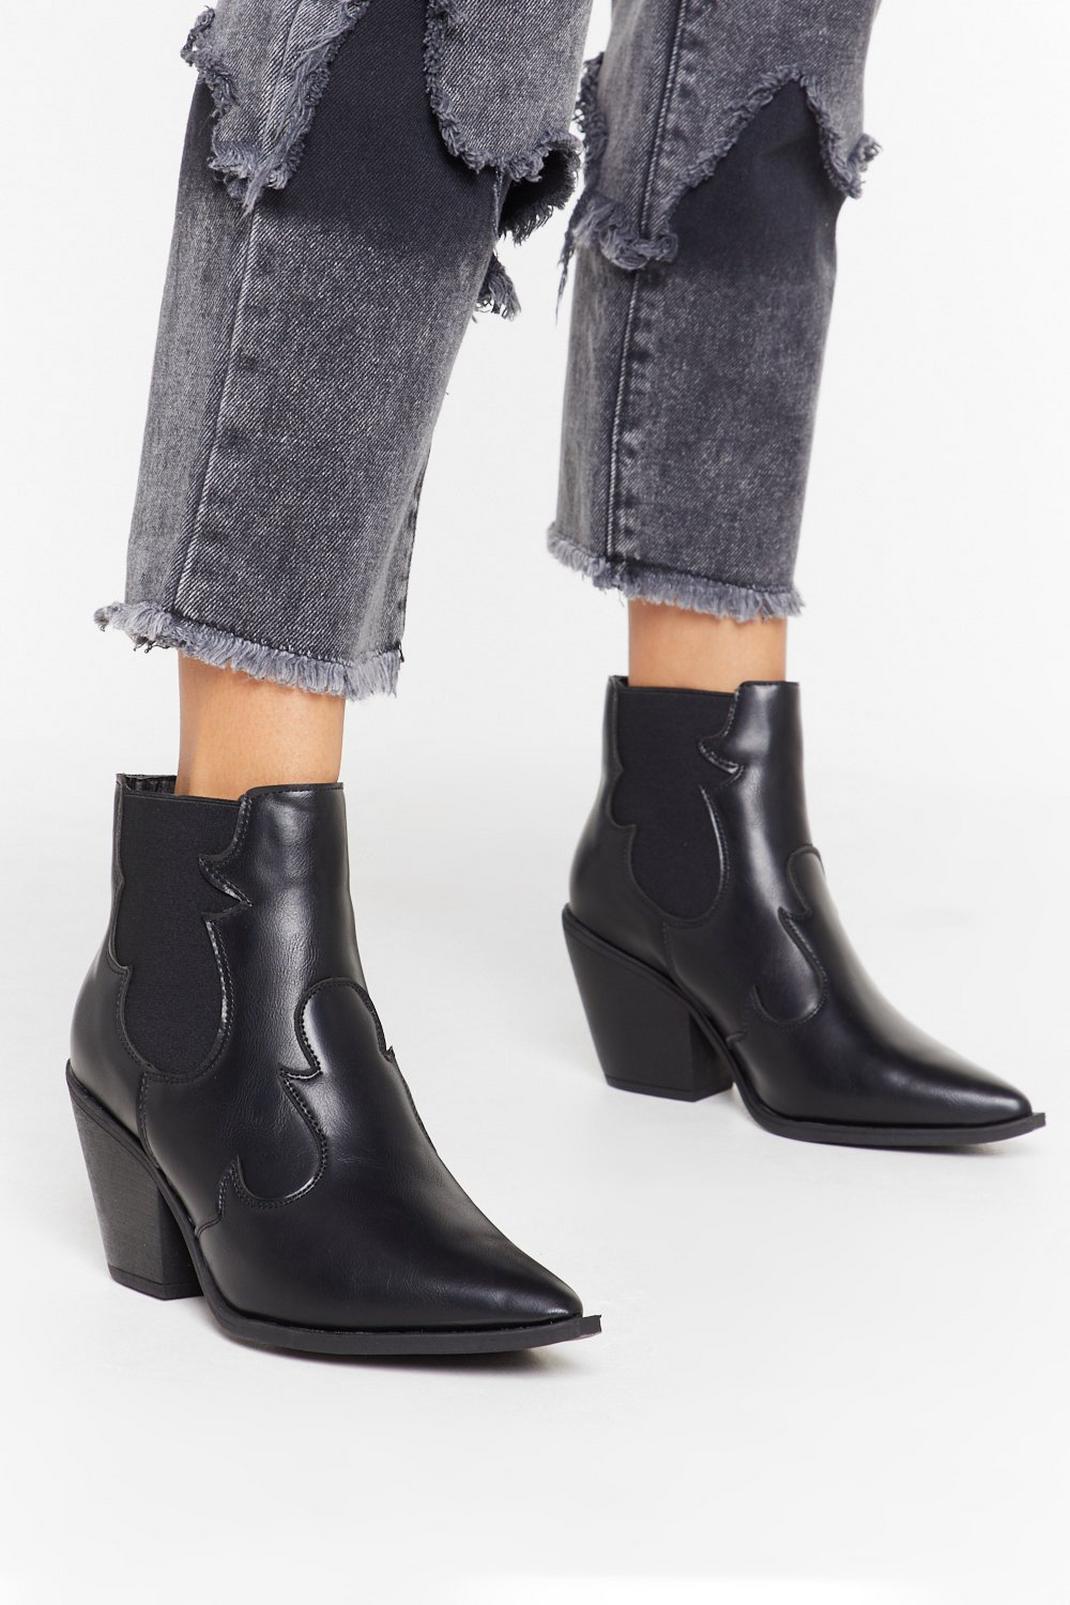 You Deserve the West Faux Leather Ankle Boots | Nasty Gal